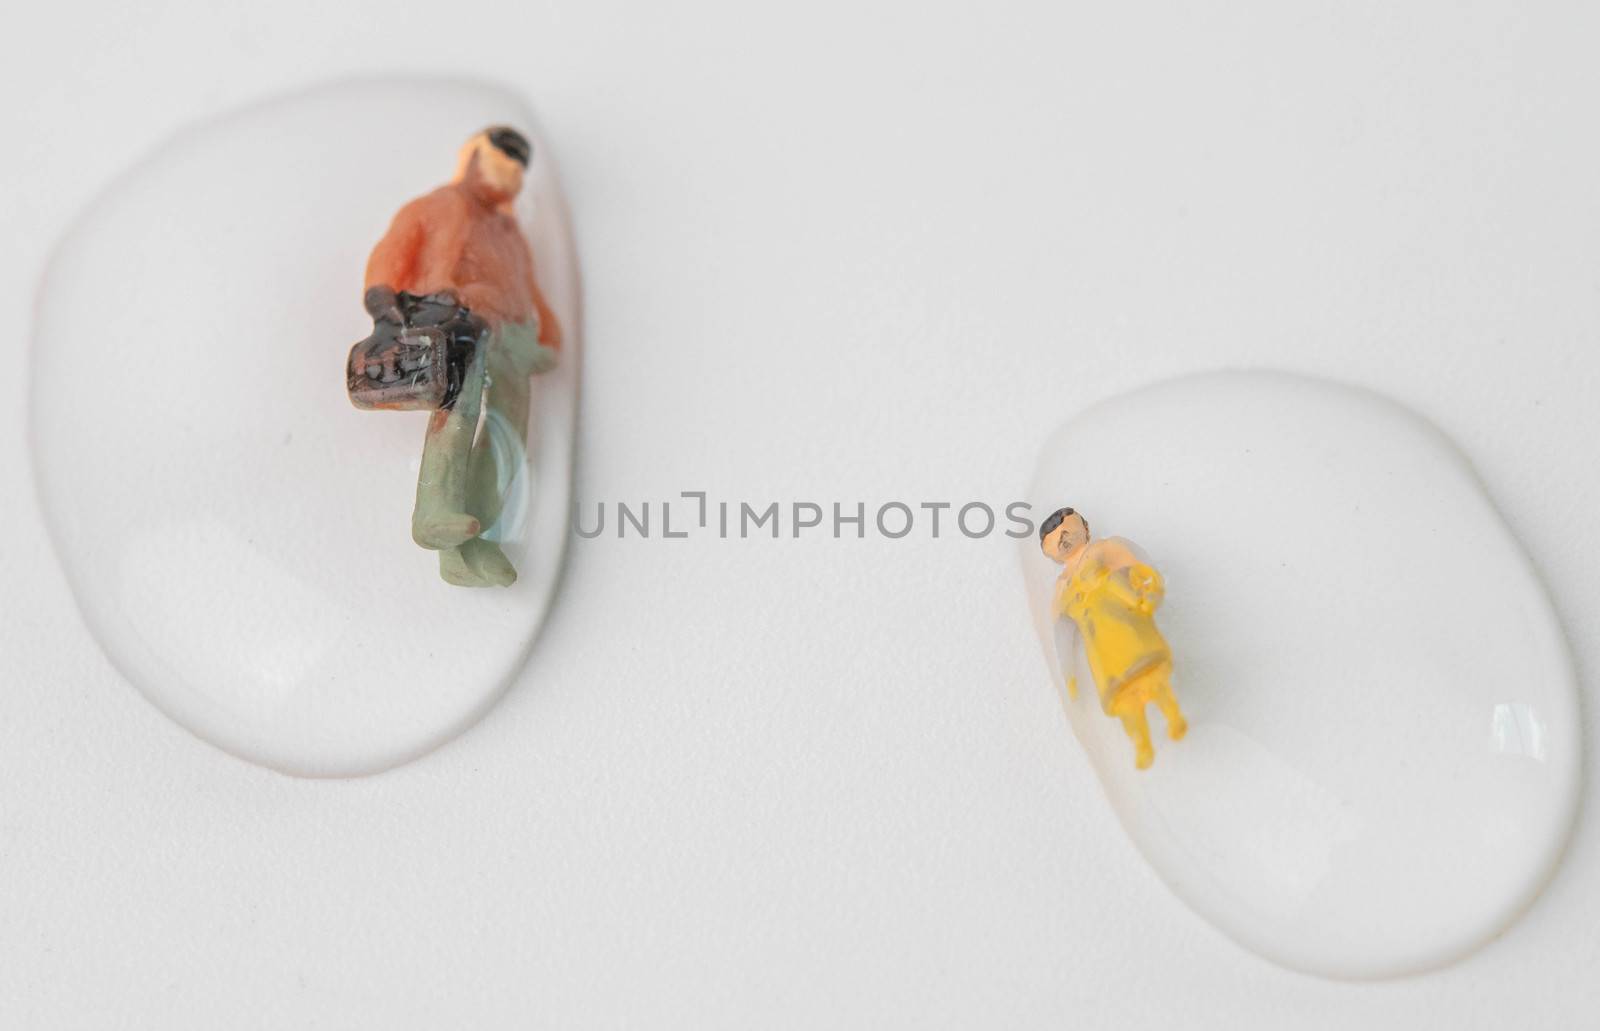 Miniature people get drowned in drops of water on white background. Macro photography concept idea for solution of solving problems in the wrong life. by TEERASAK